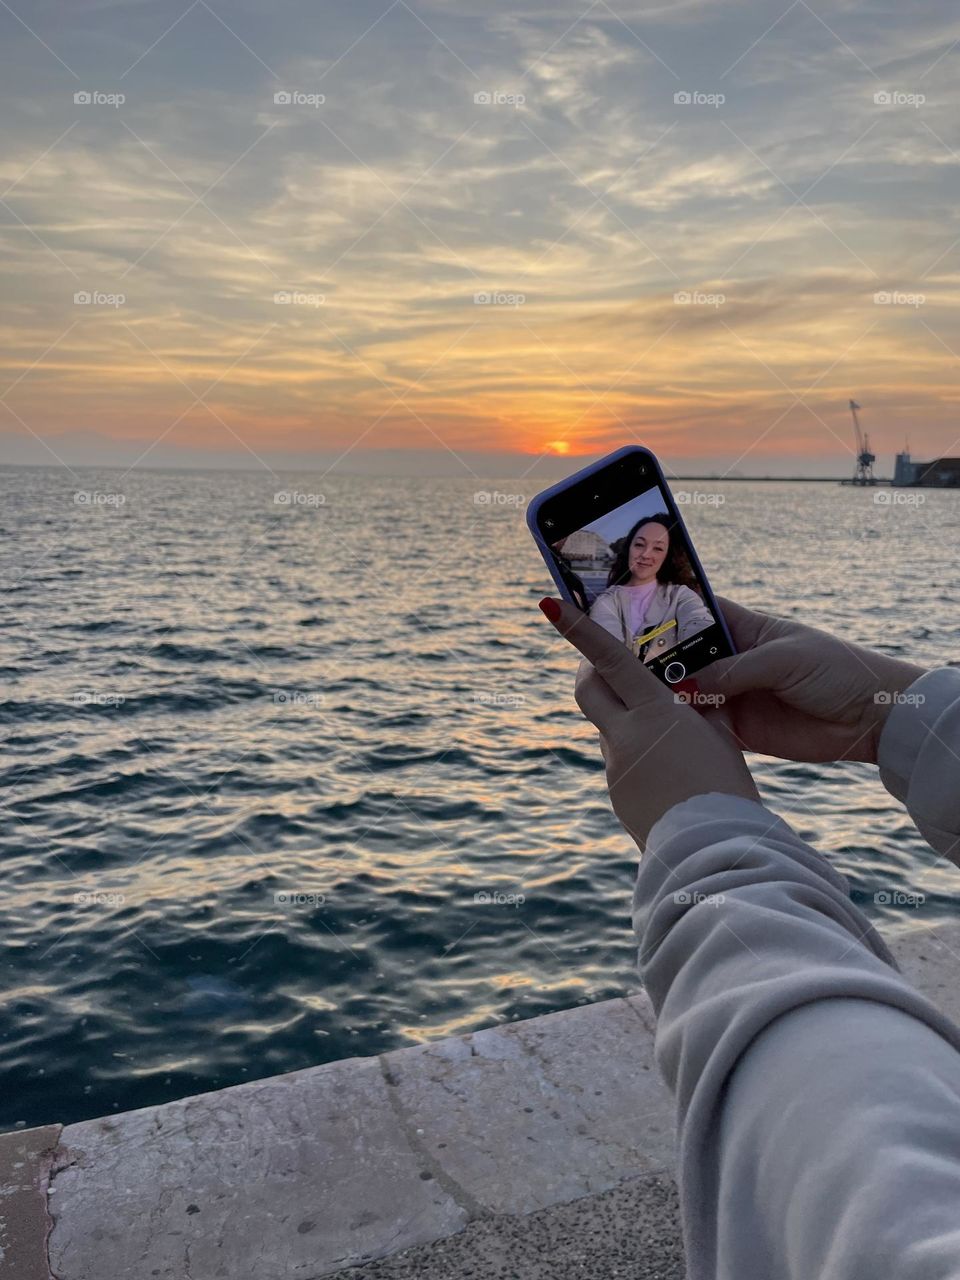 Taking photo at the sunset 